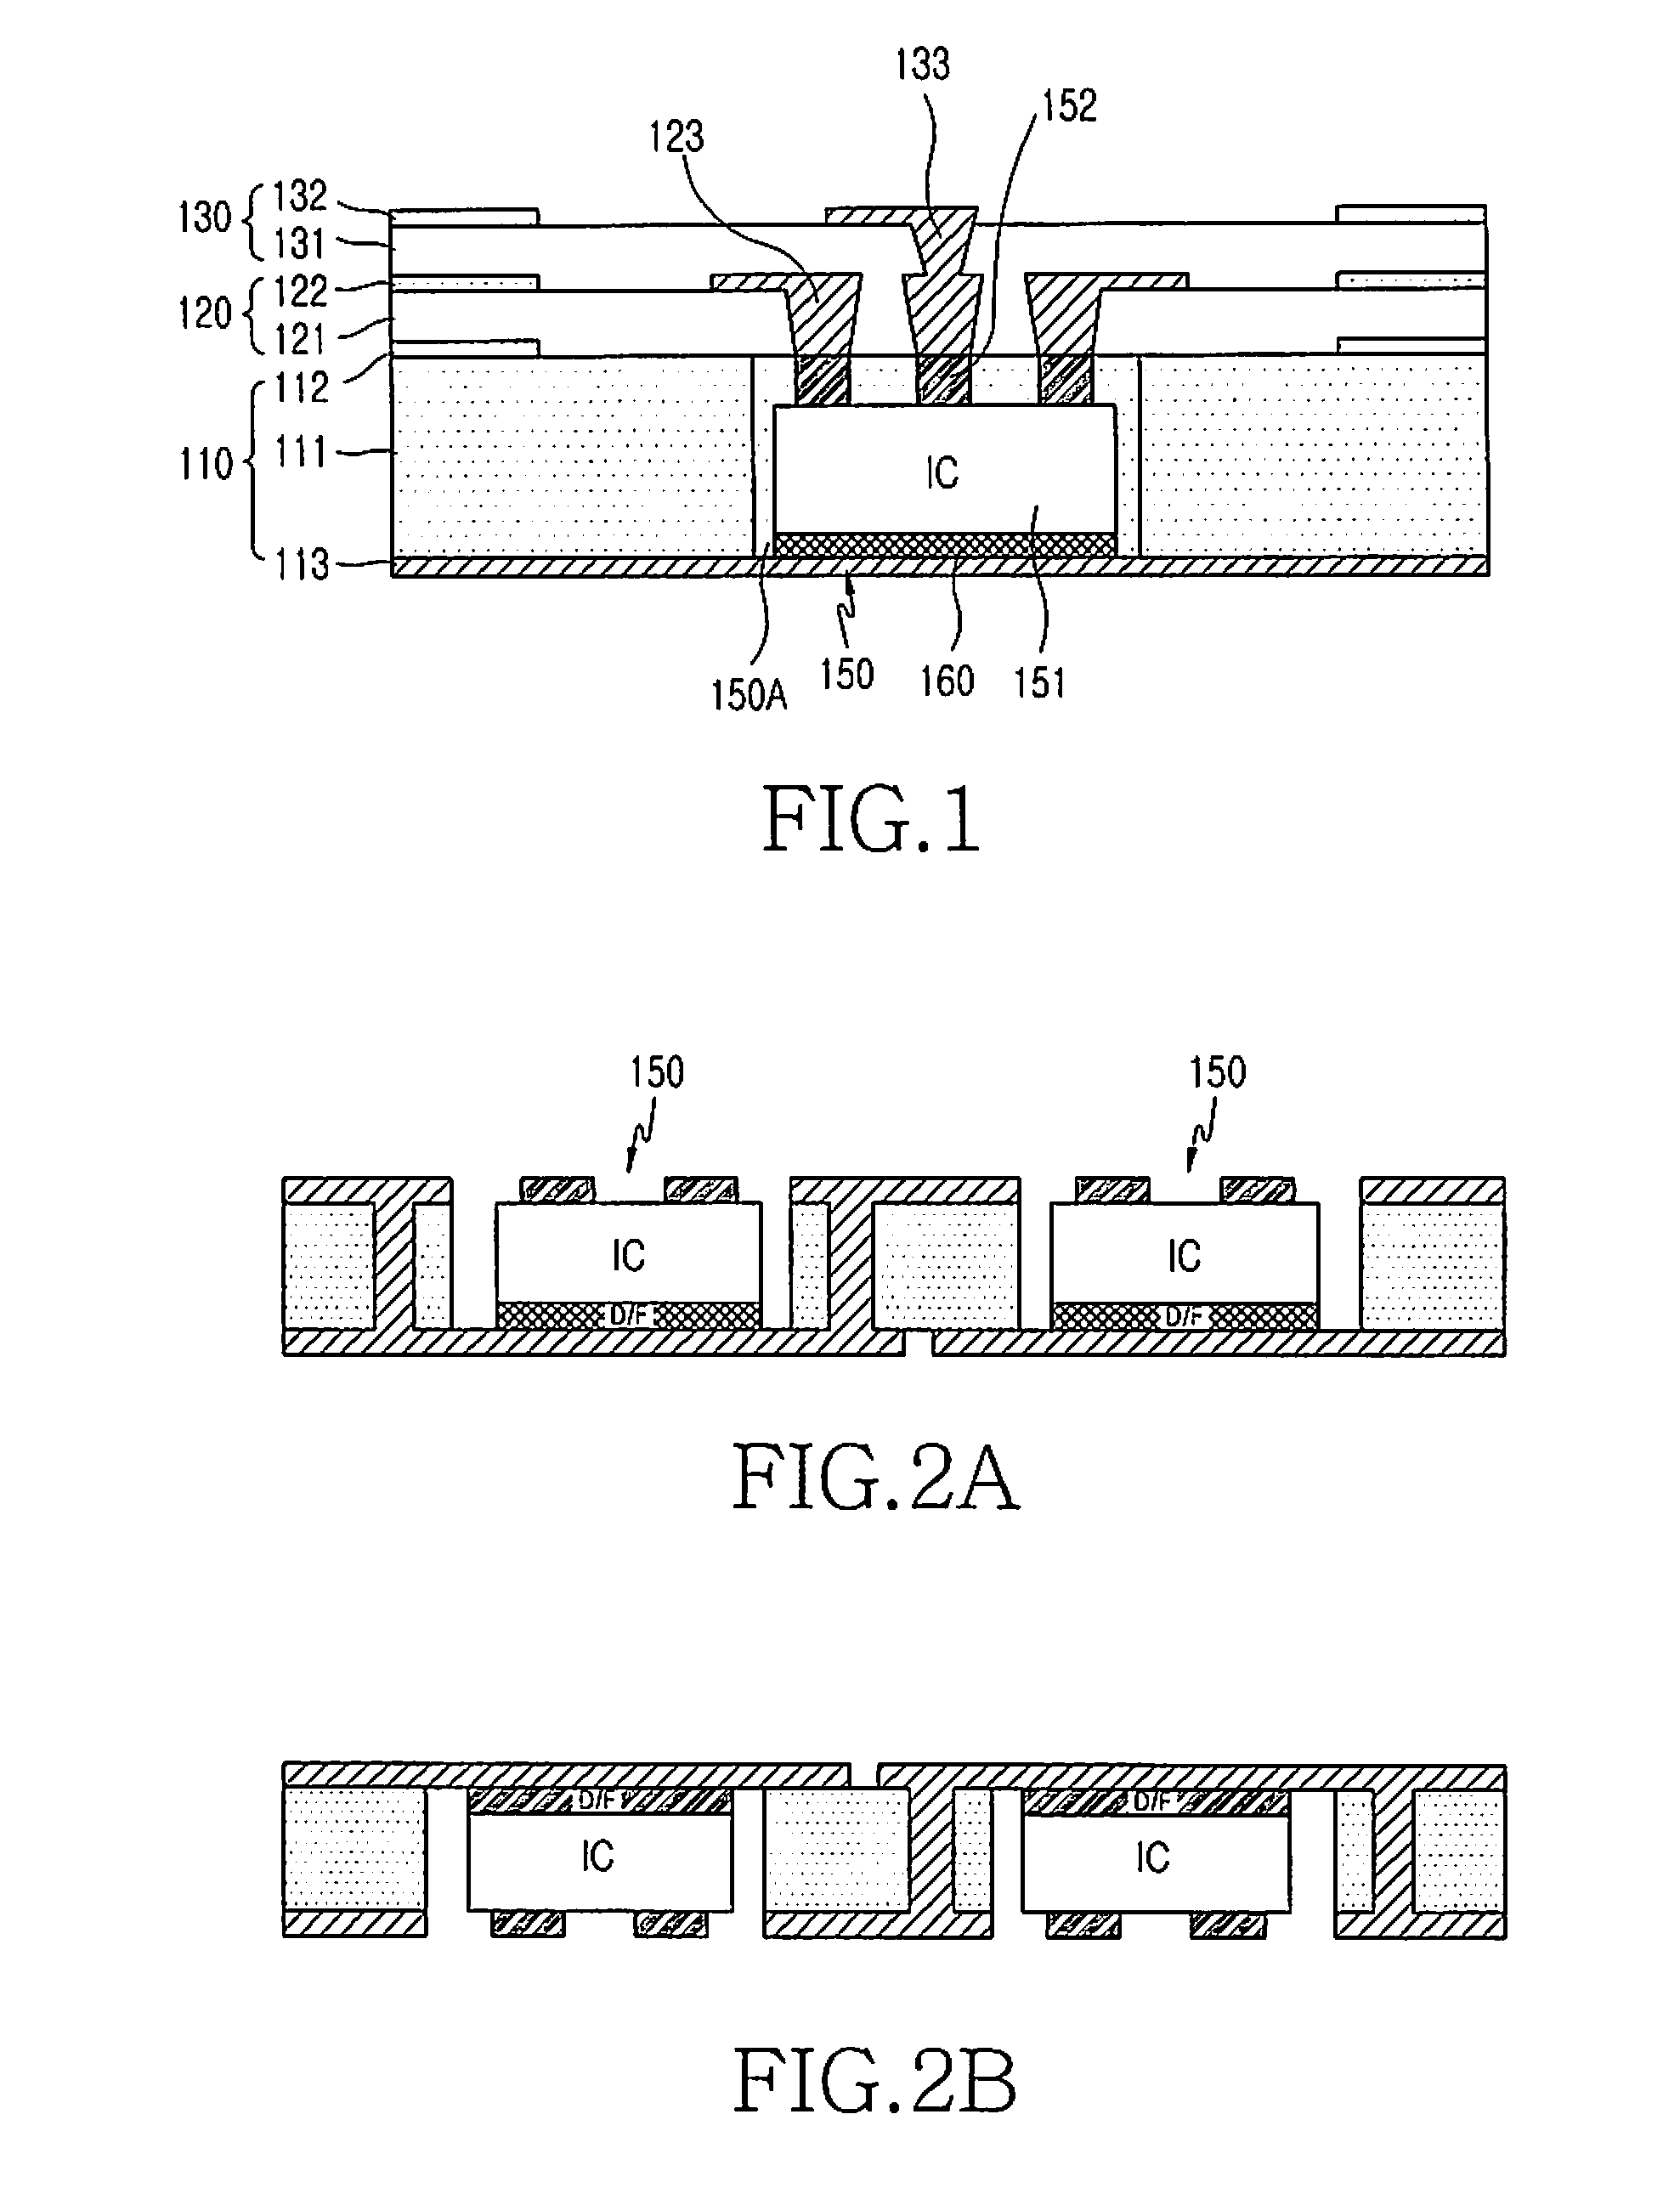 Printed circuit board having built-in integrated circuit package and fabrication method therefor